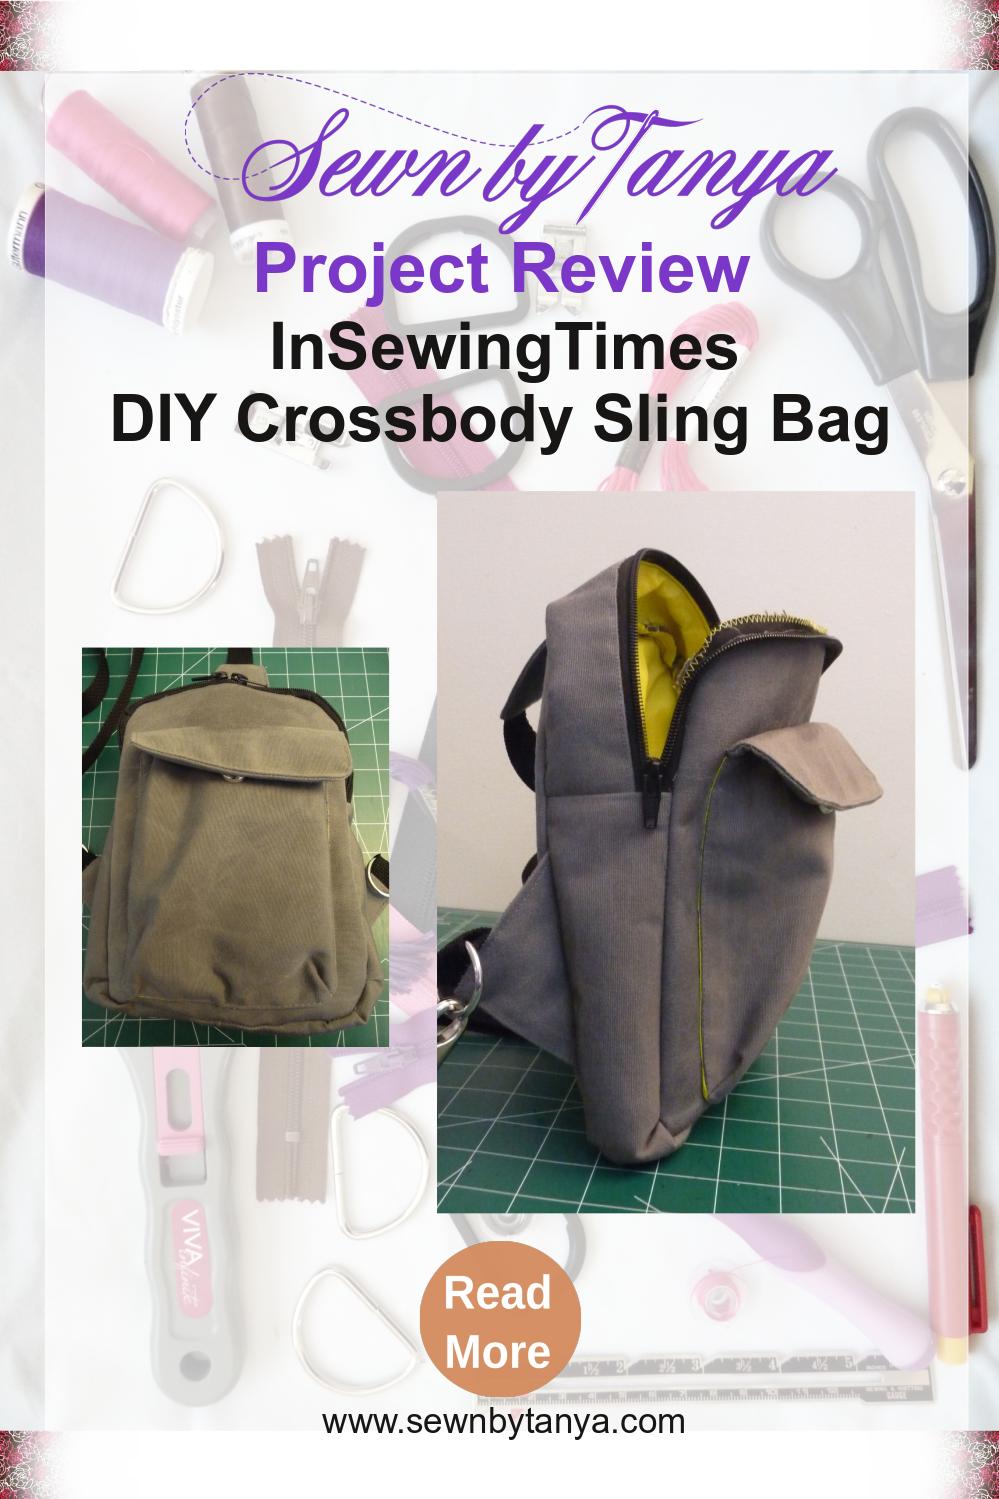 Sewn By Tanya Project Review | InSewingTimes DIY Crossbody Sing Bag